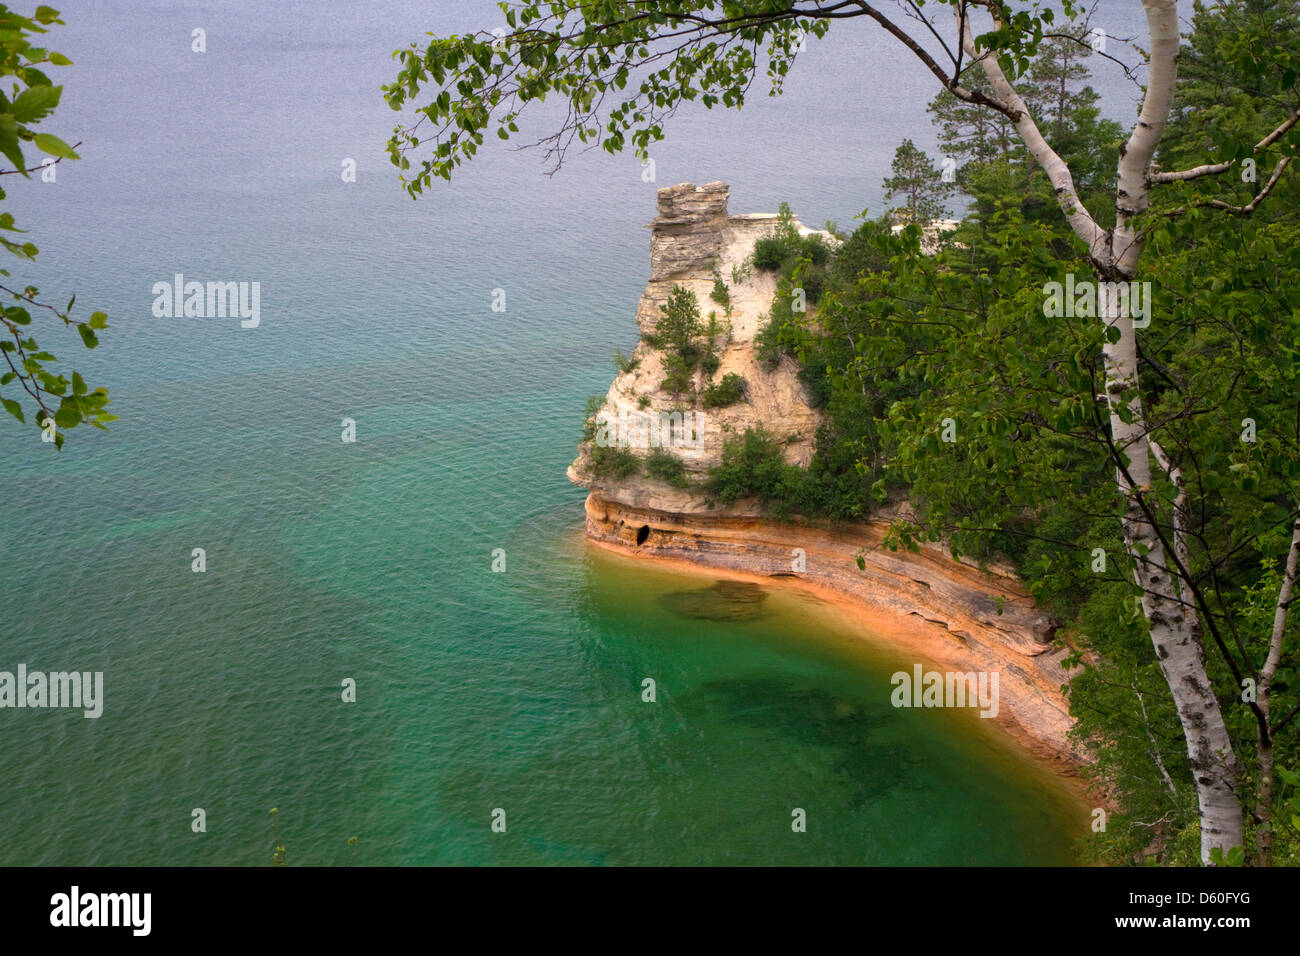 Miners Castle at Pictured Rocks National Lakeshore located on the shore of Lake Superior in the Upper Peninsula of Michigan, USA Stock Photo